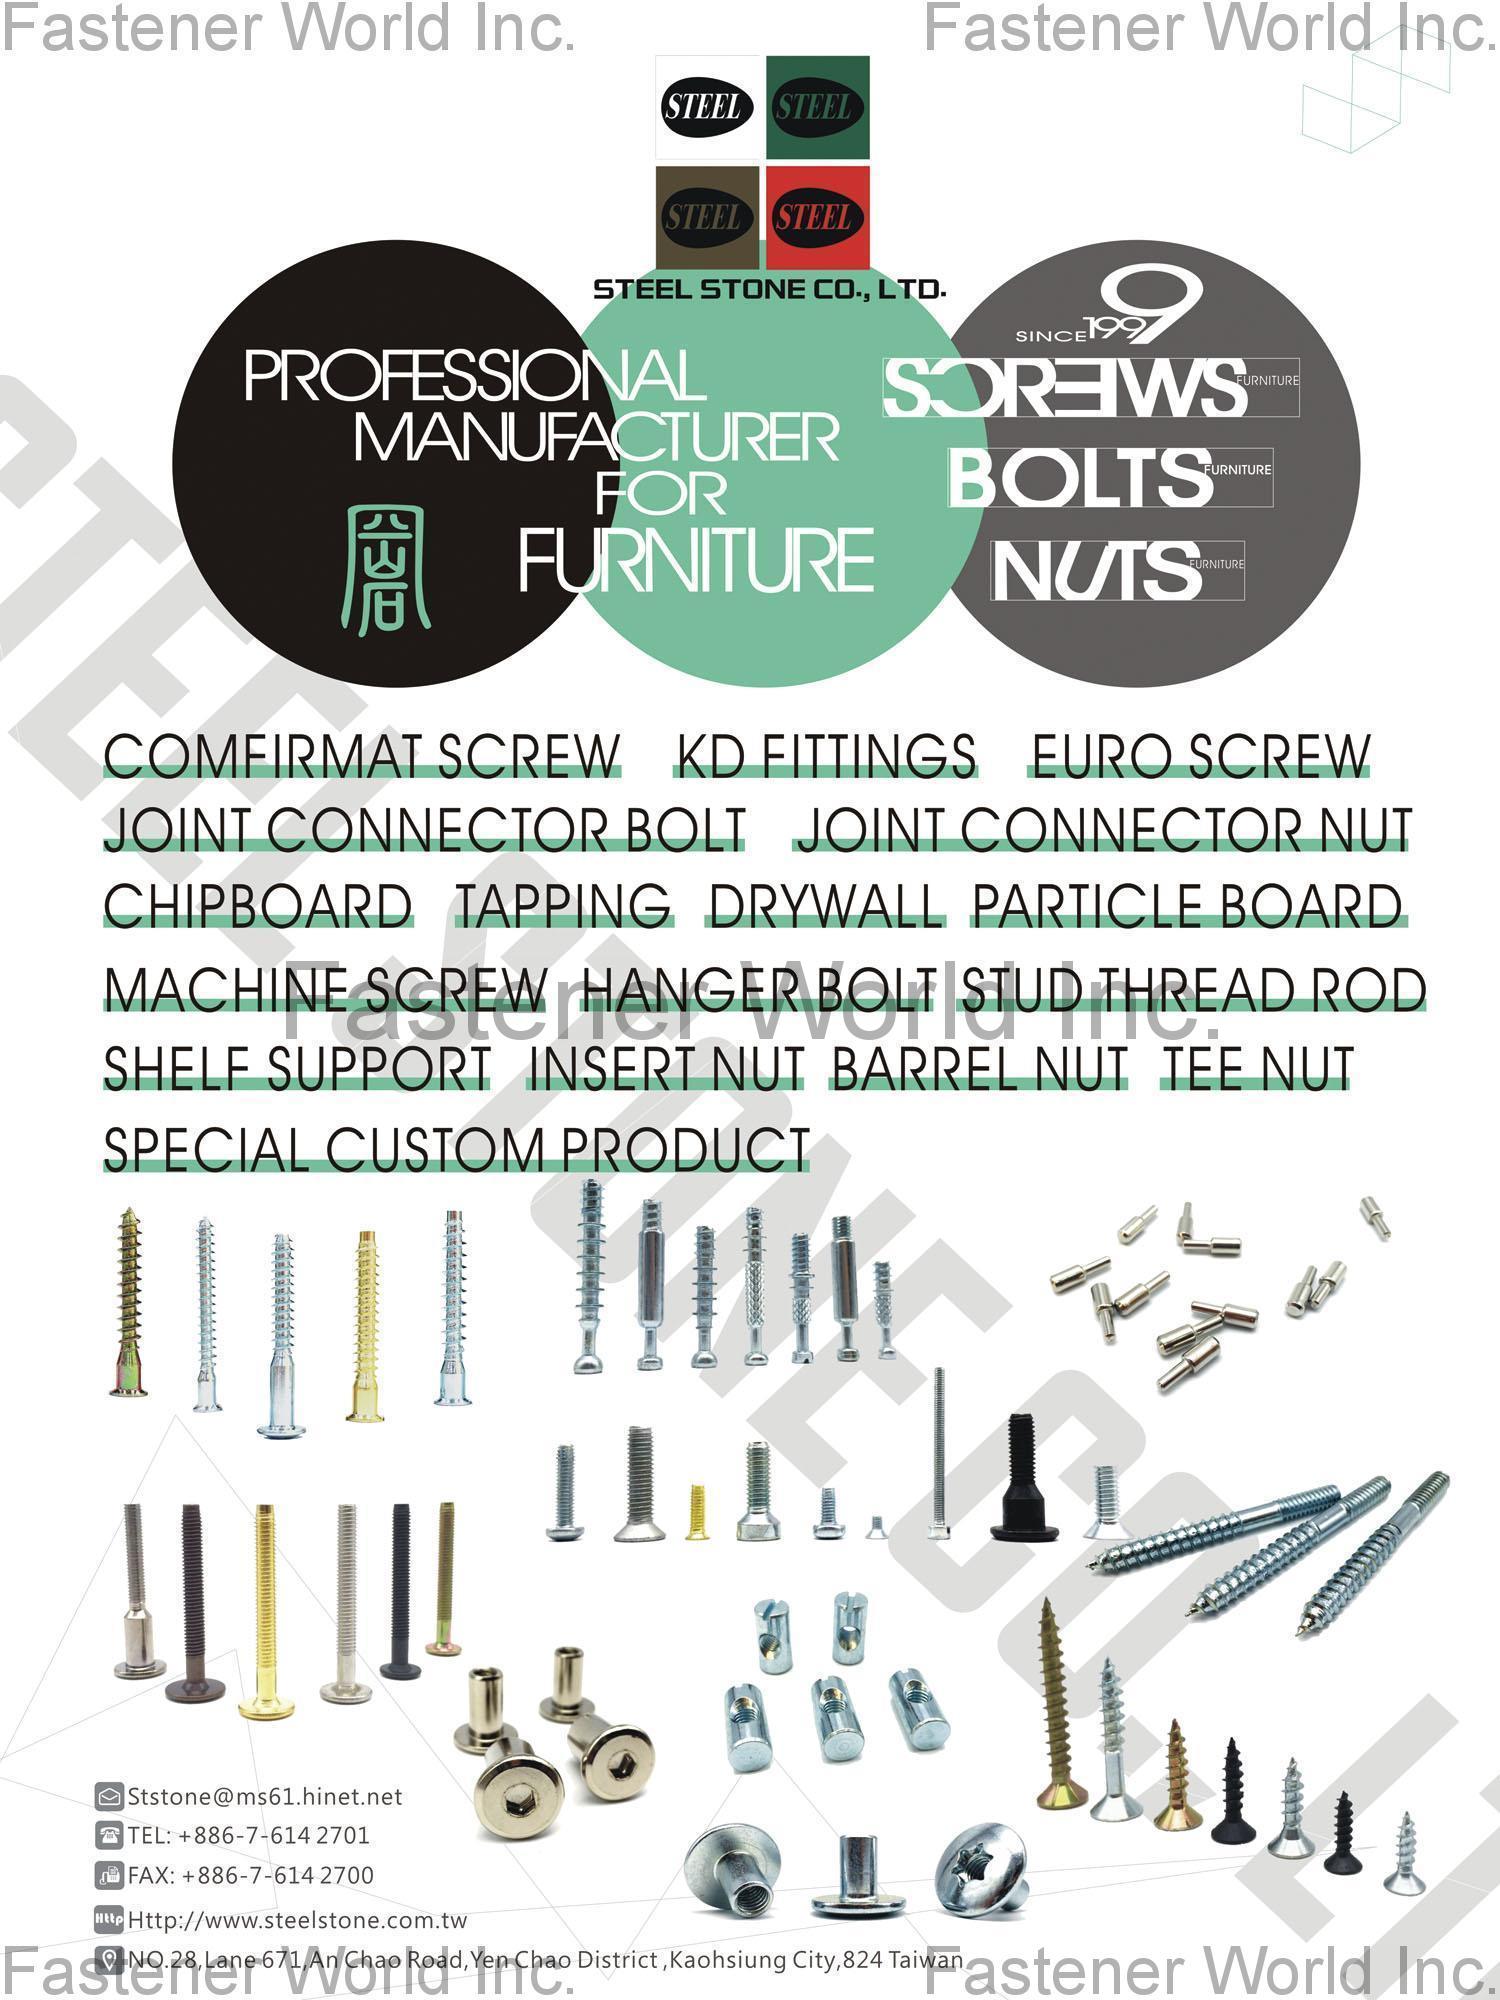 STEEL STONE CO., LTD.  , CONFIRMAT SCREWS, KD FITTINGS, JOINT CONNECTOR BOLTS, JOINT CONNECTOR NUTS, CHIPBOARD SCREW, PARTICLE BOARD SCREW, DRYWALL SCREW, TAPPING SCREW, MACHINE SCREW, EURO SCREW, HANGER BOLT, STUD THREAD ROD, SHELF SUPPORT, INSERT NUT, BARREL NUT, TEE NUT, CUSTOM-MADE PRODUCTS , Chipboard Screws